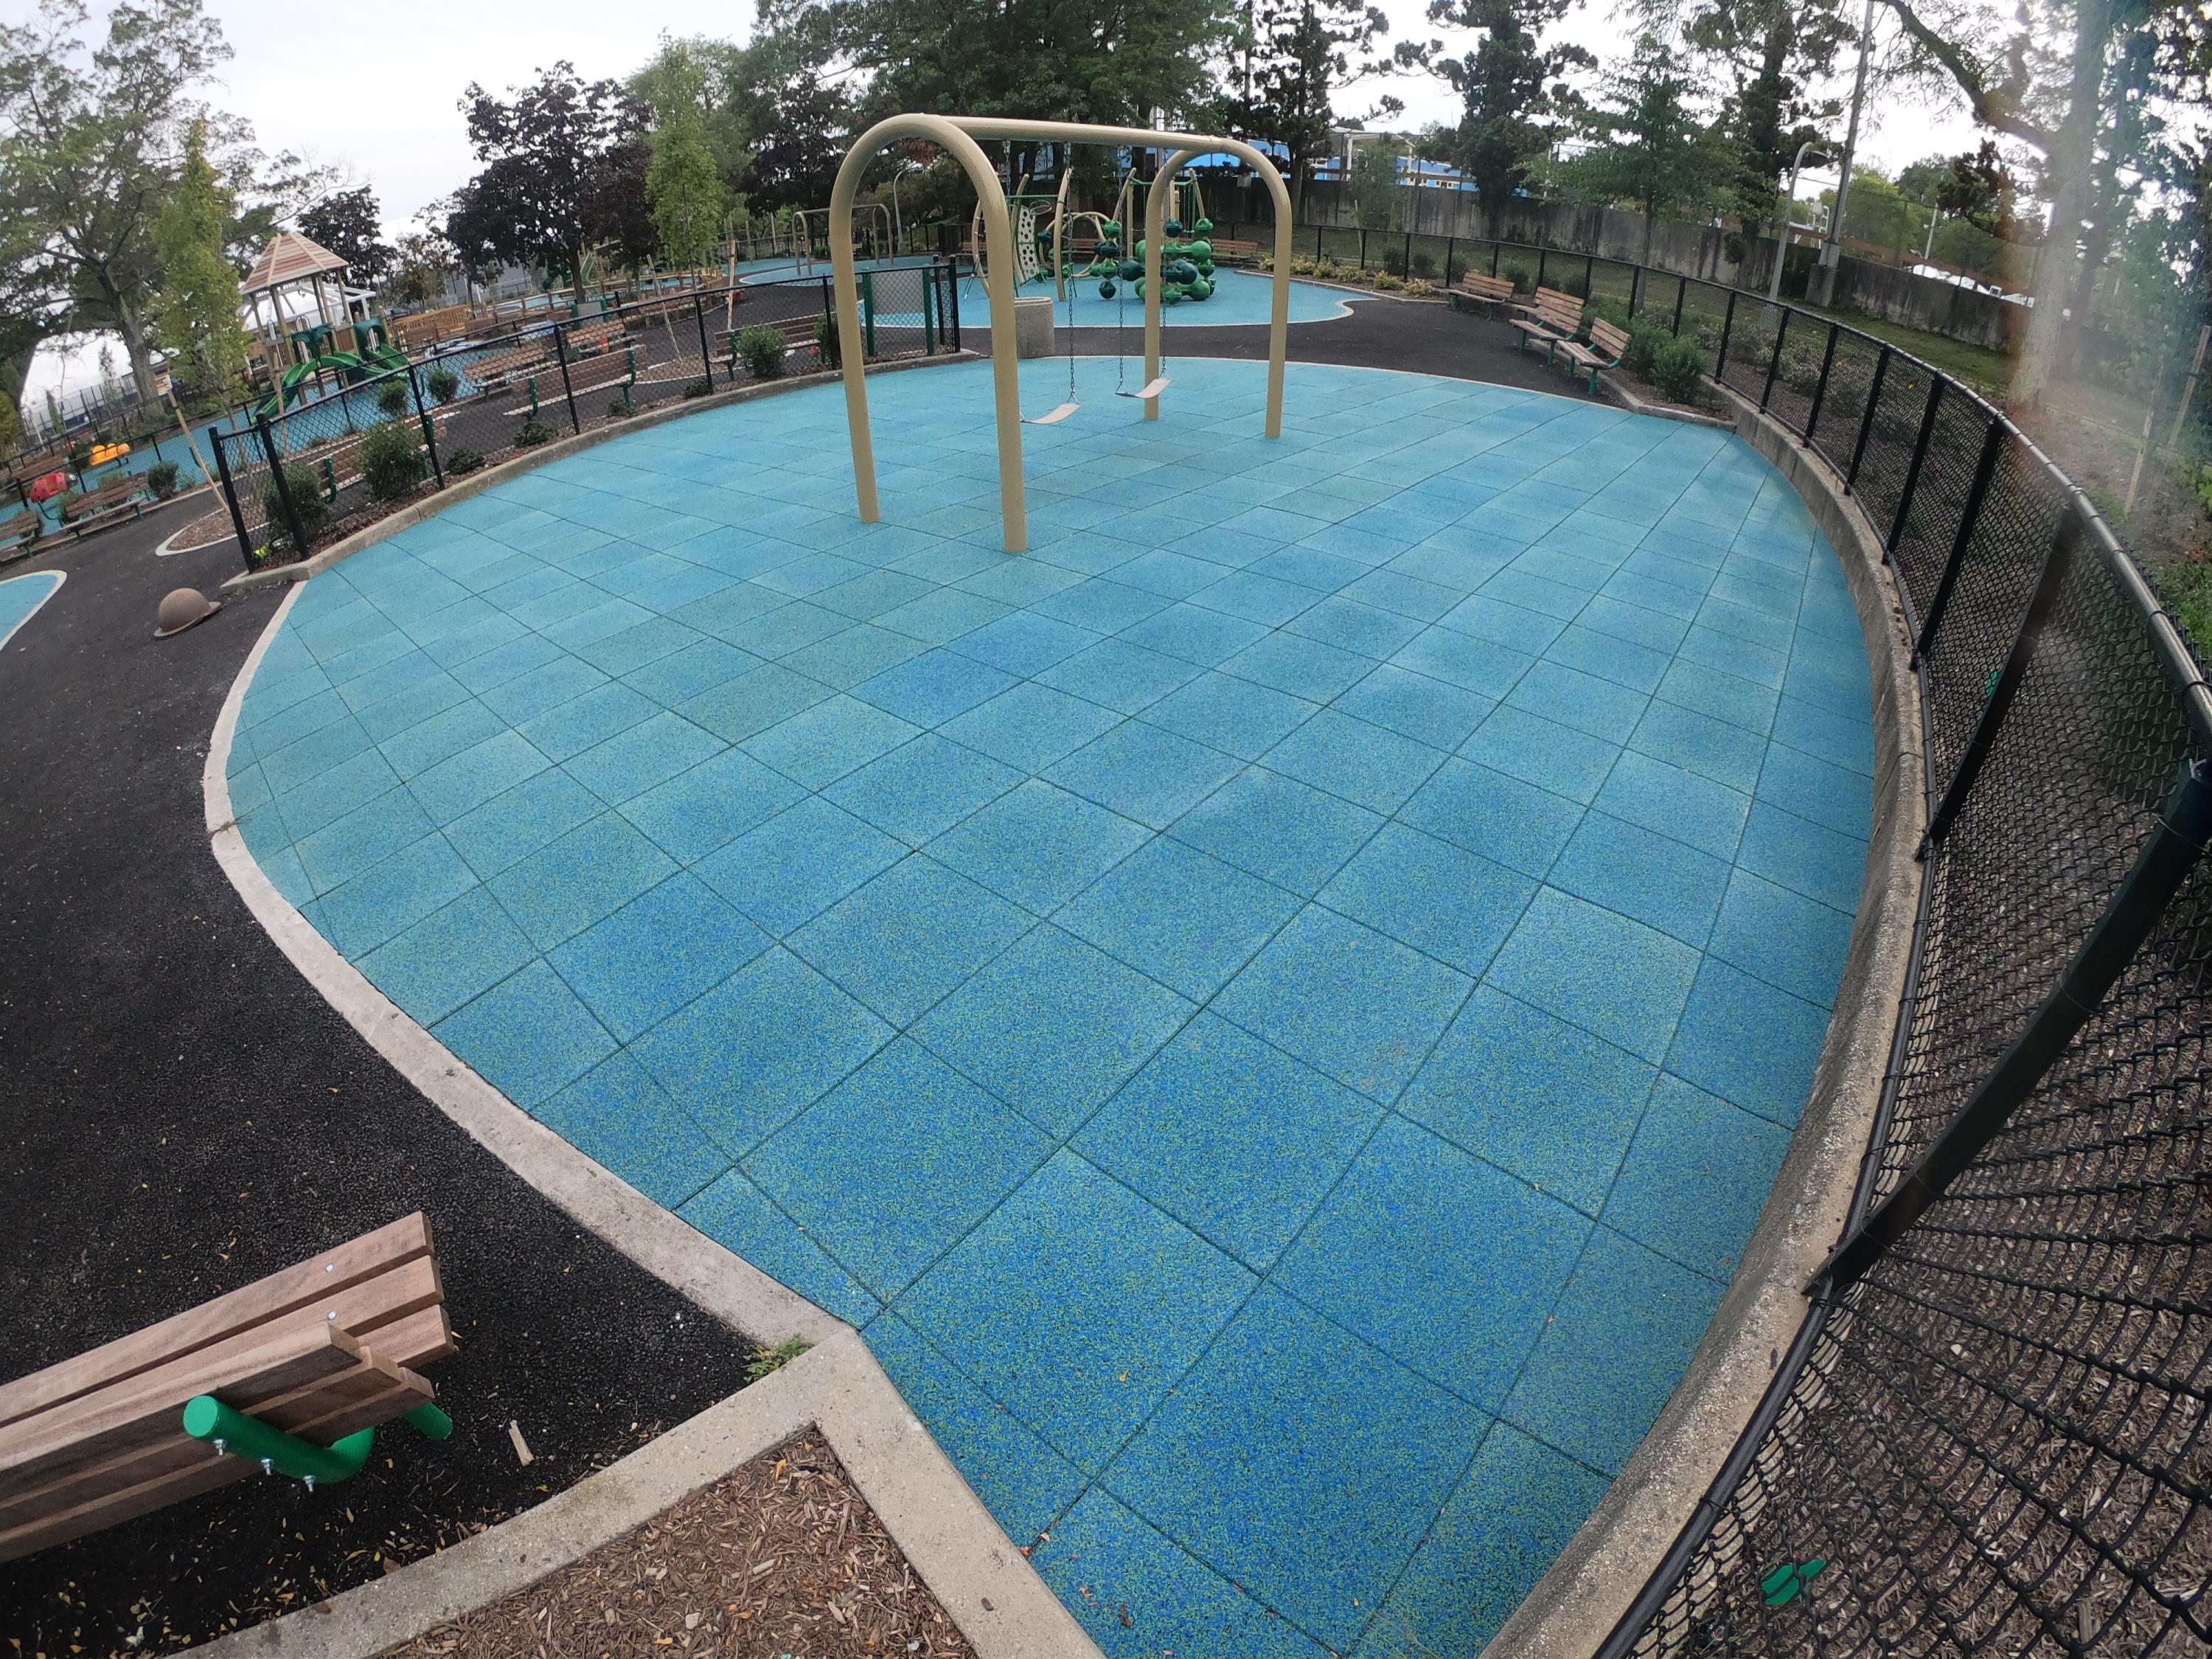 County Park Playground = Using TPV Top Tiles w50% Blue 45% Green 5% Black p